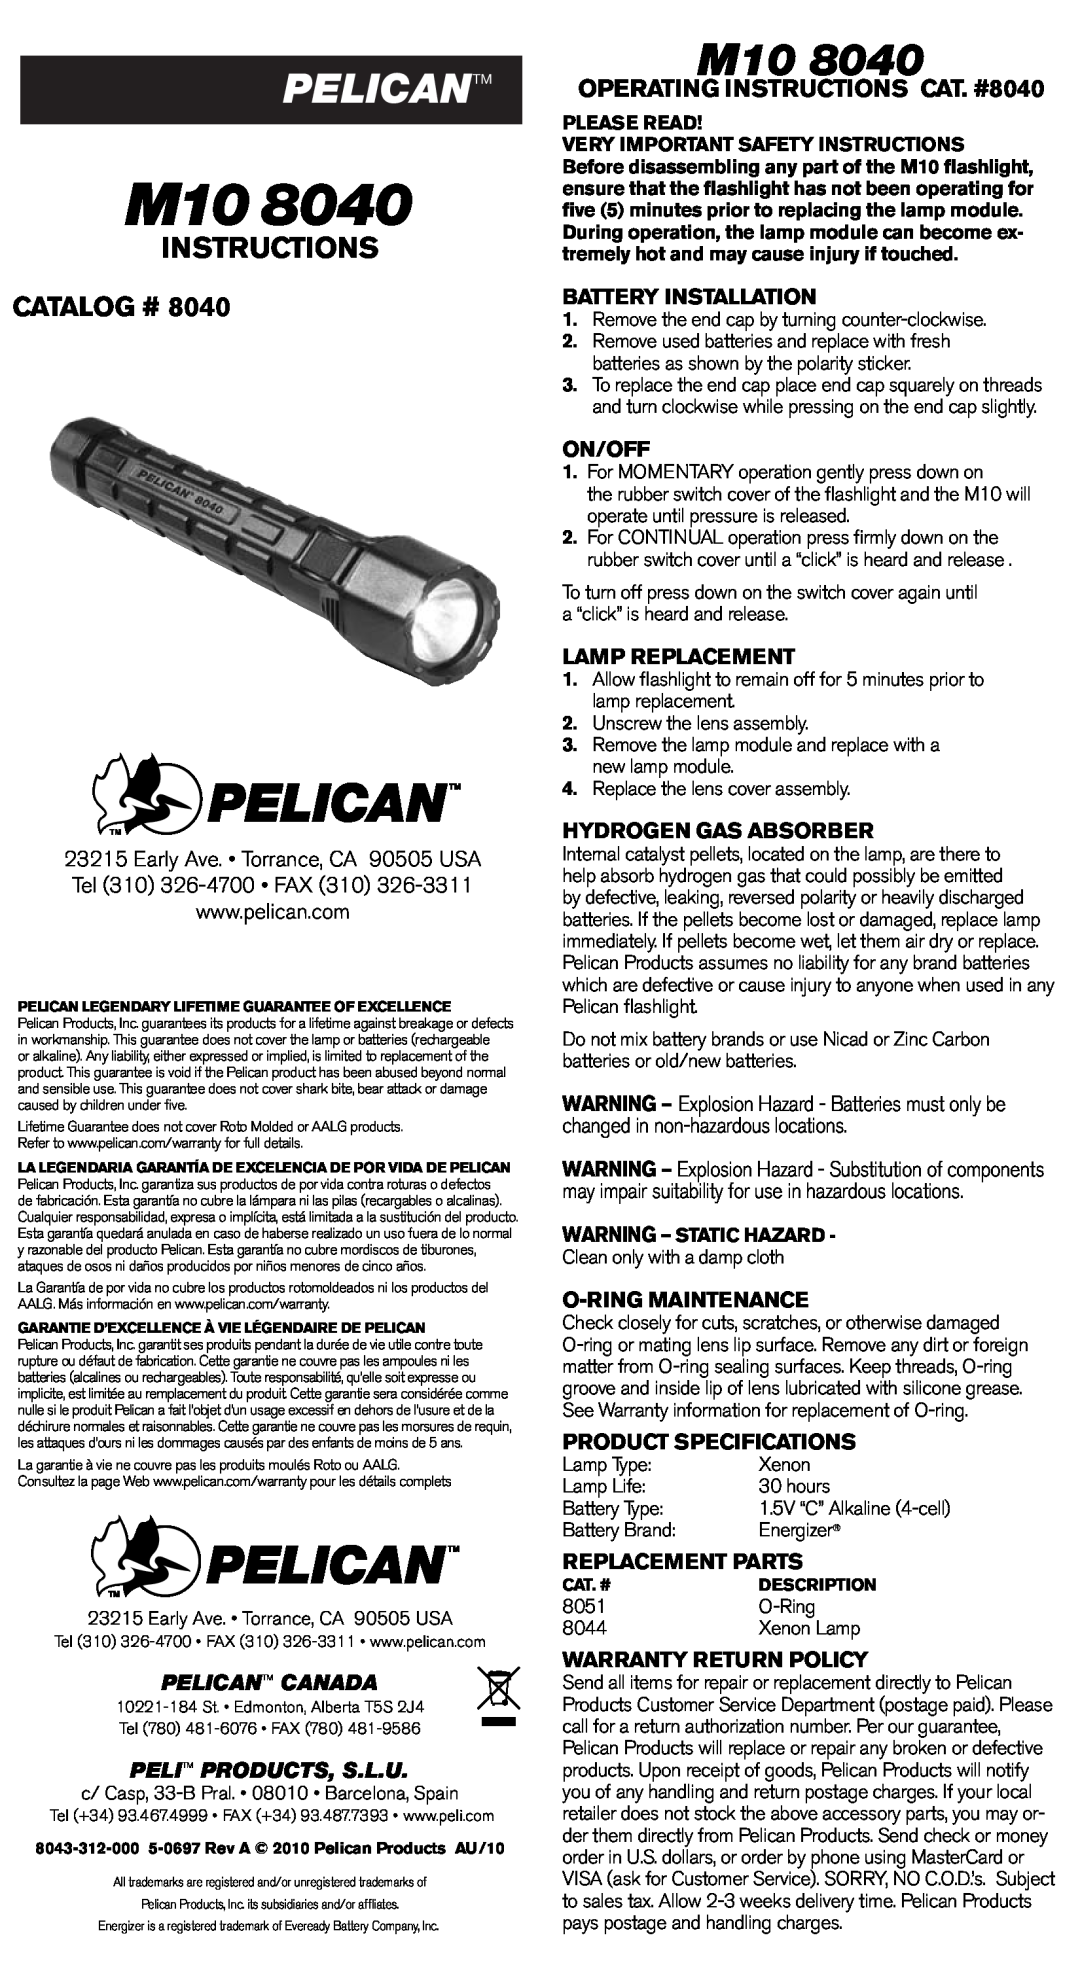 Pelican M10 8040 operating instructions OPERATING INSTRUCTIONS CAT. #8040, Battery Installation, On/Off, Lamp Replacement 